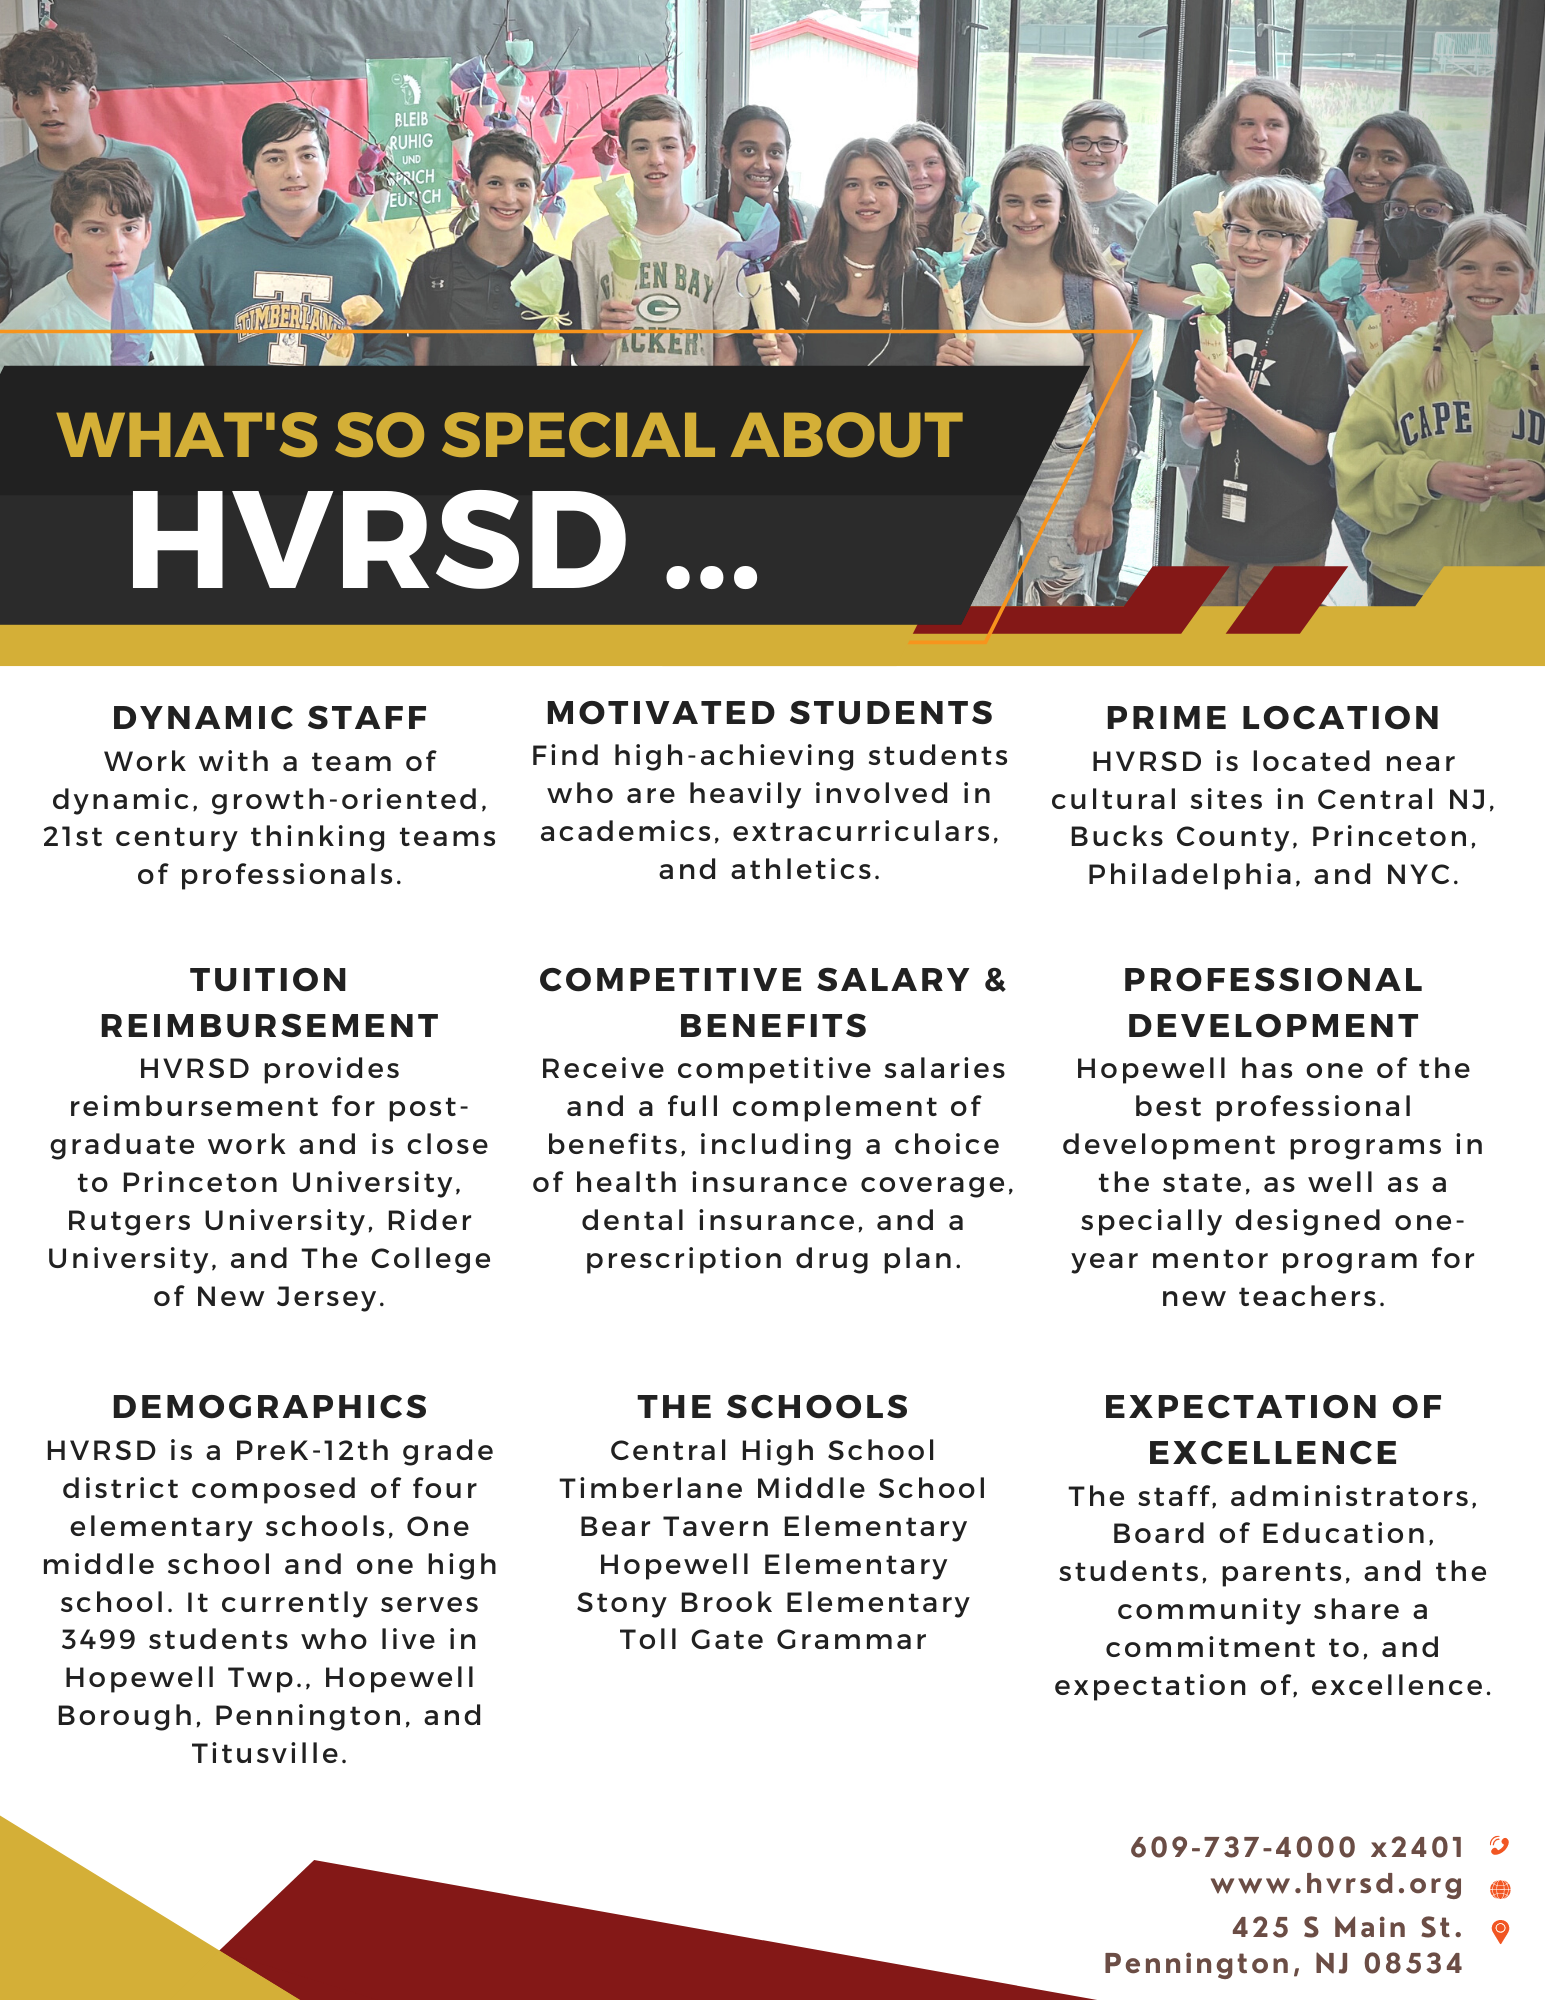 What's So Special About HVRSD: Information About Hopewell Valley